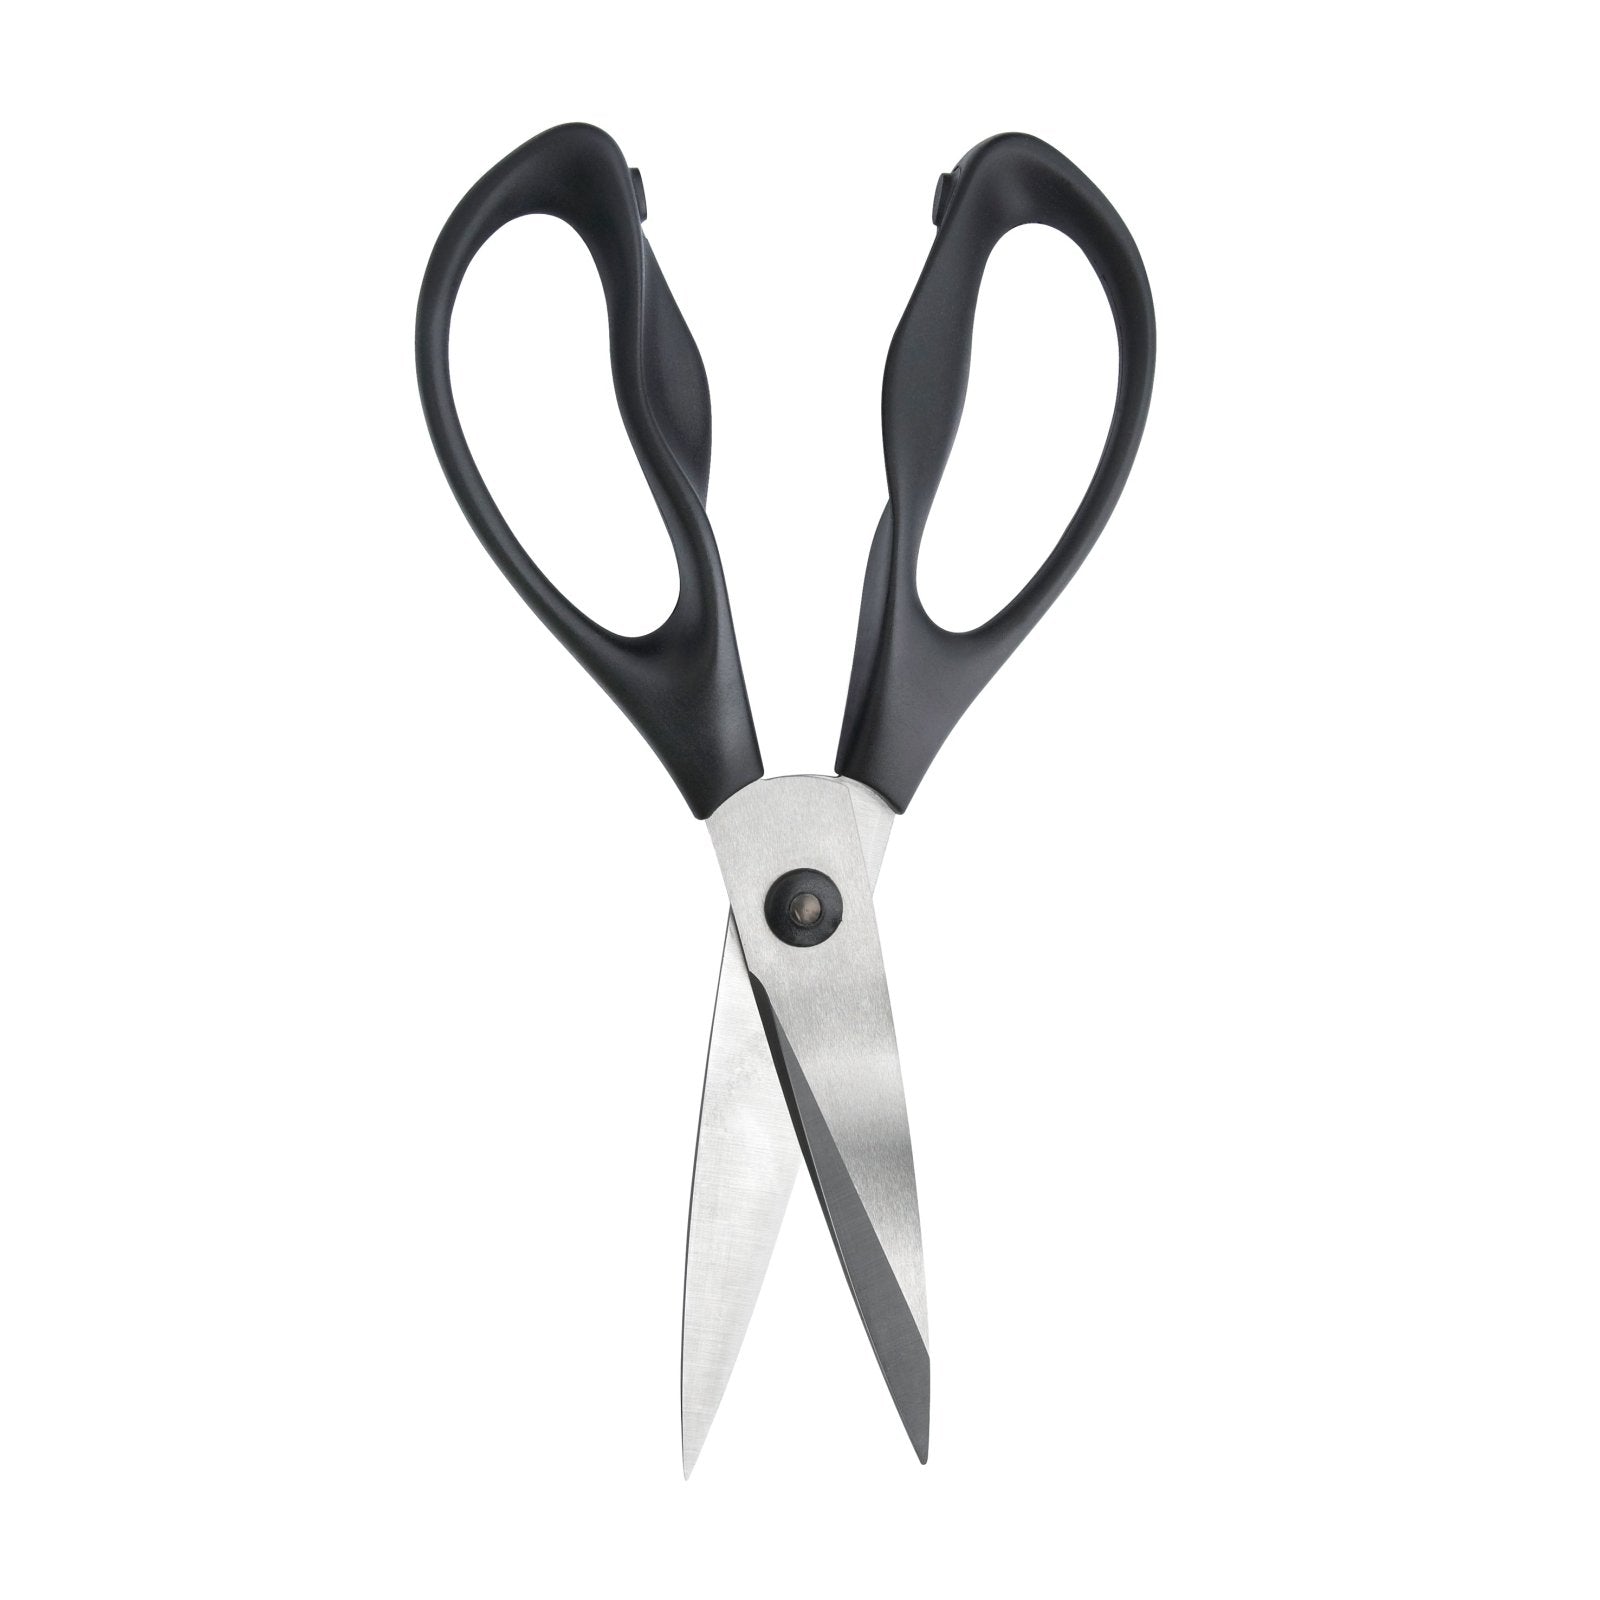 Robert Welch Signature Household Scissors & Stand - SIGSA2290V/2 - The Cotswold Knife Company